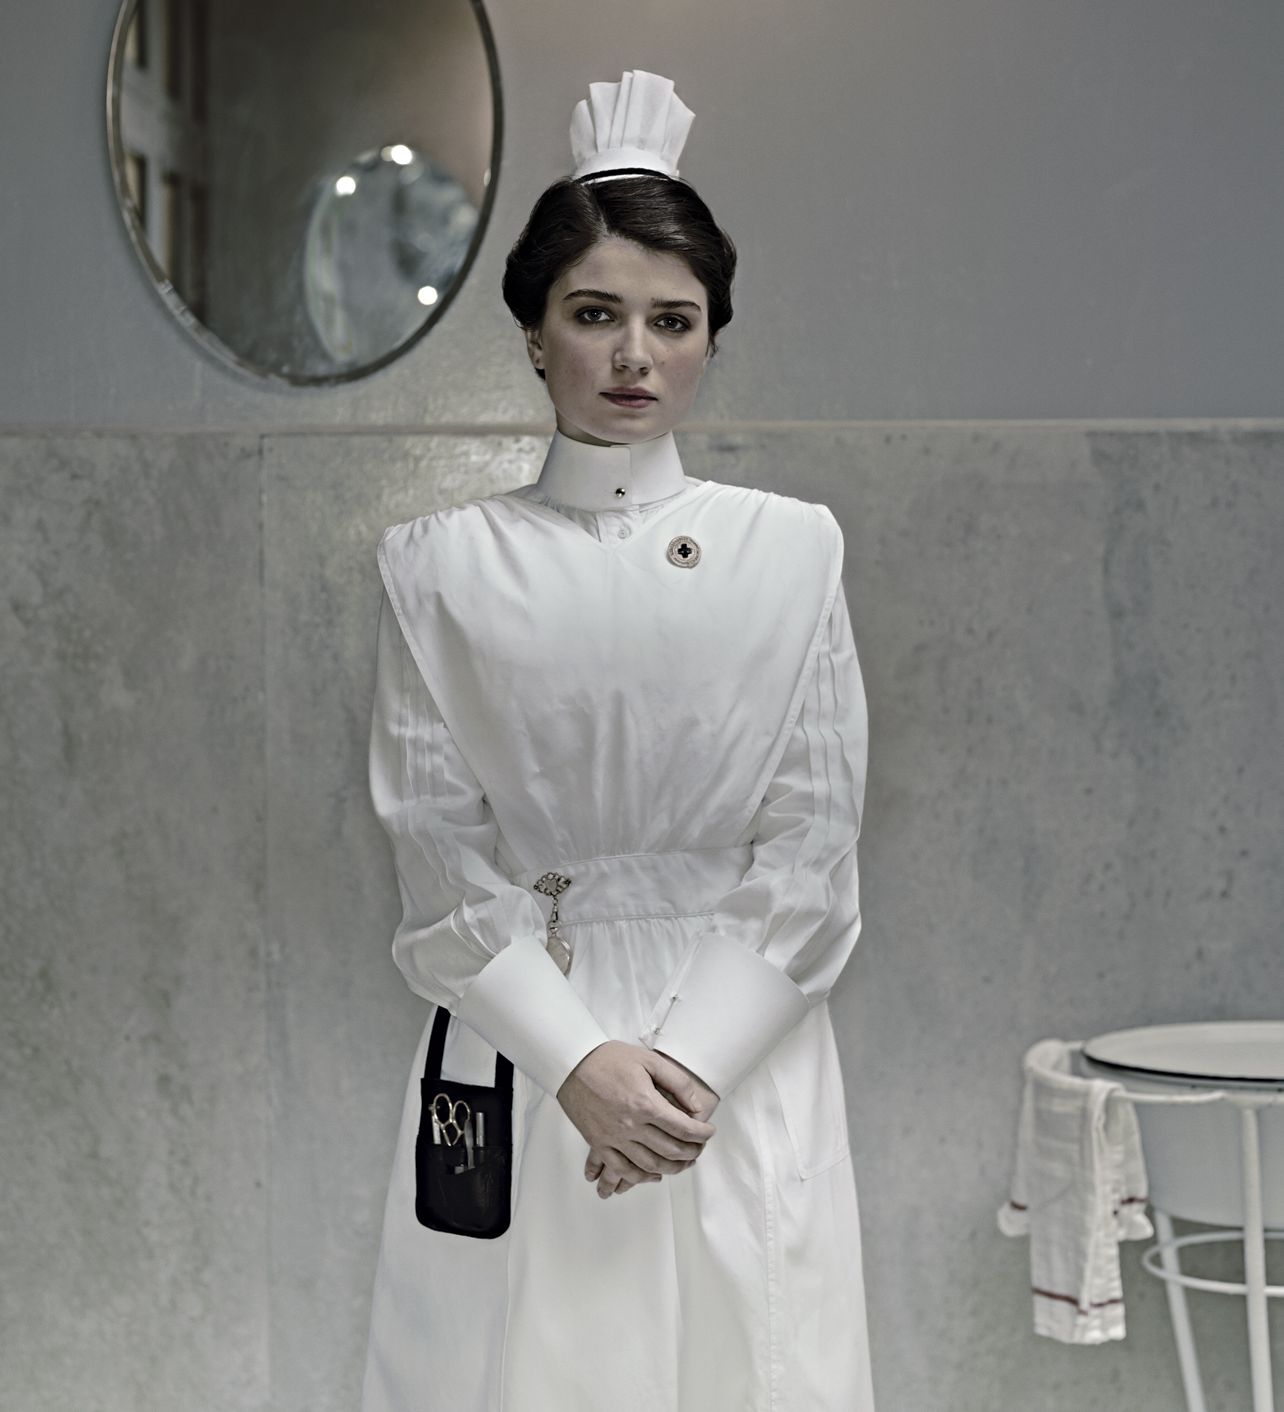 The nurse in The Knick